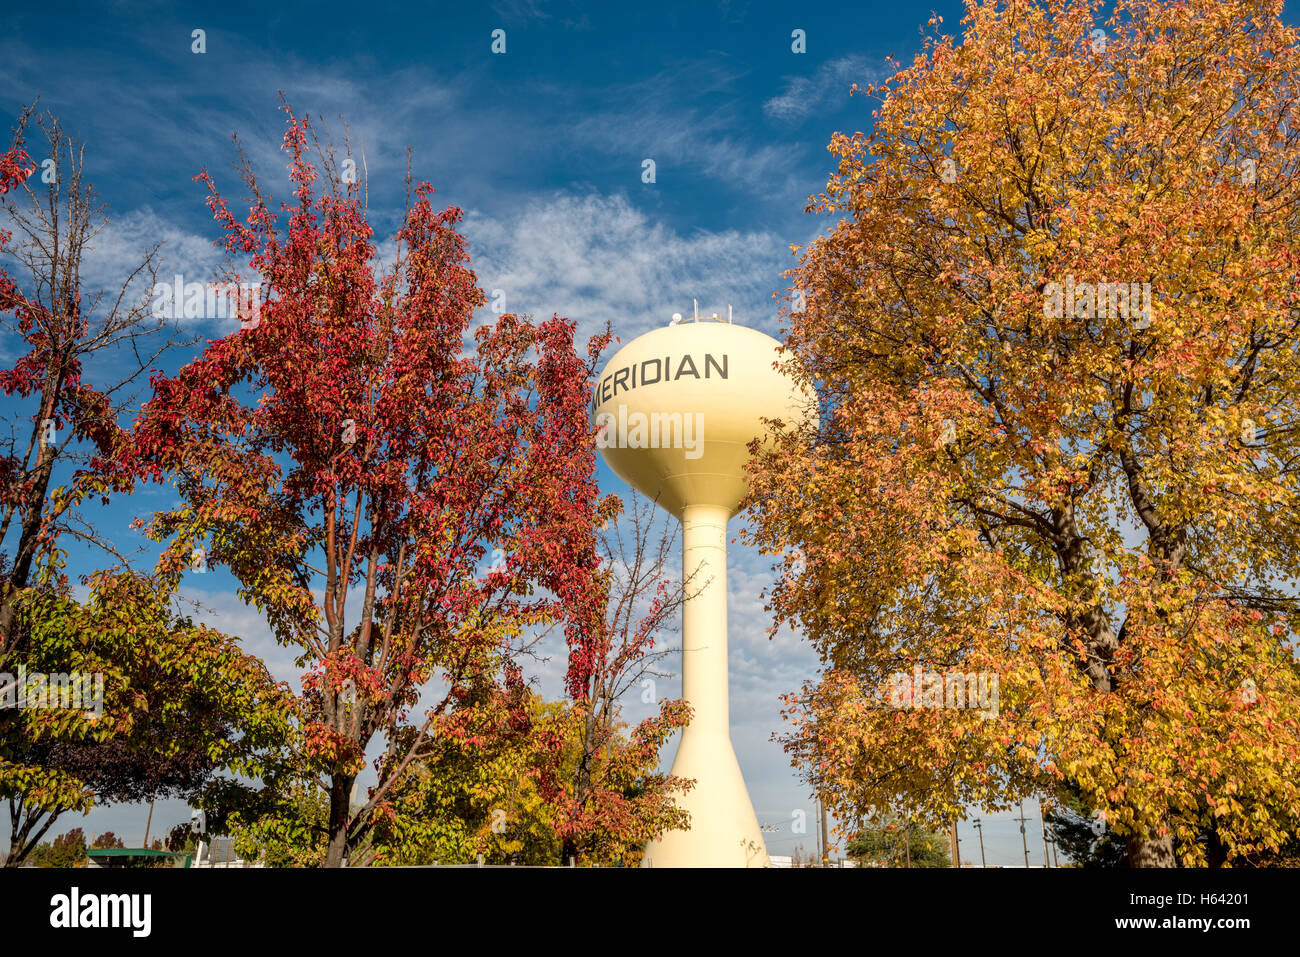 Water tower in Meridian Idaho with fall colored trees Stock Photo